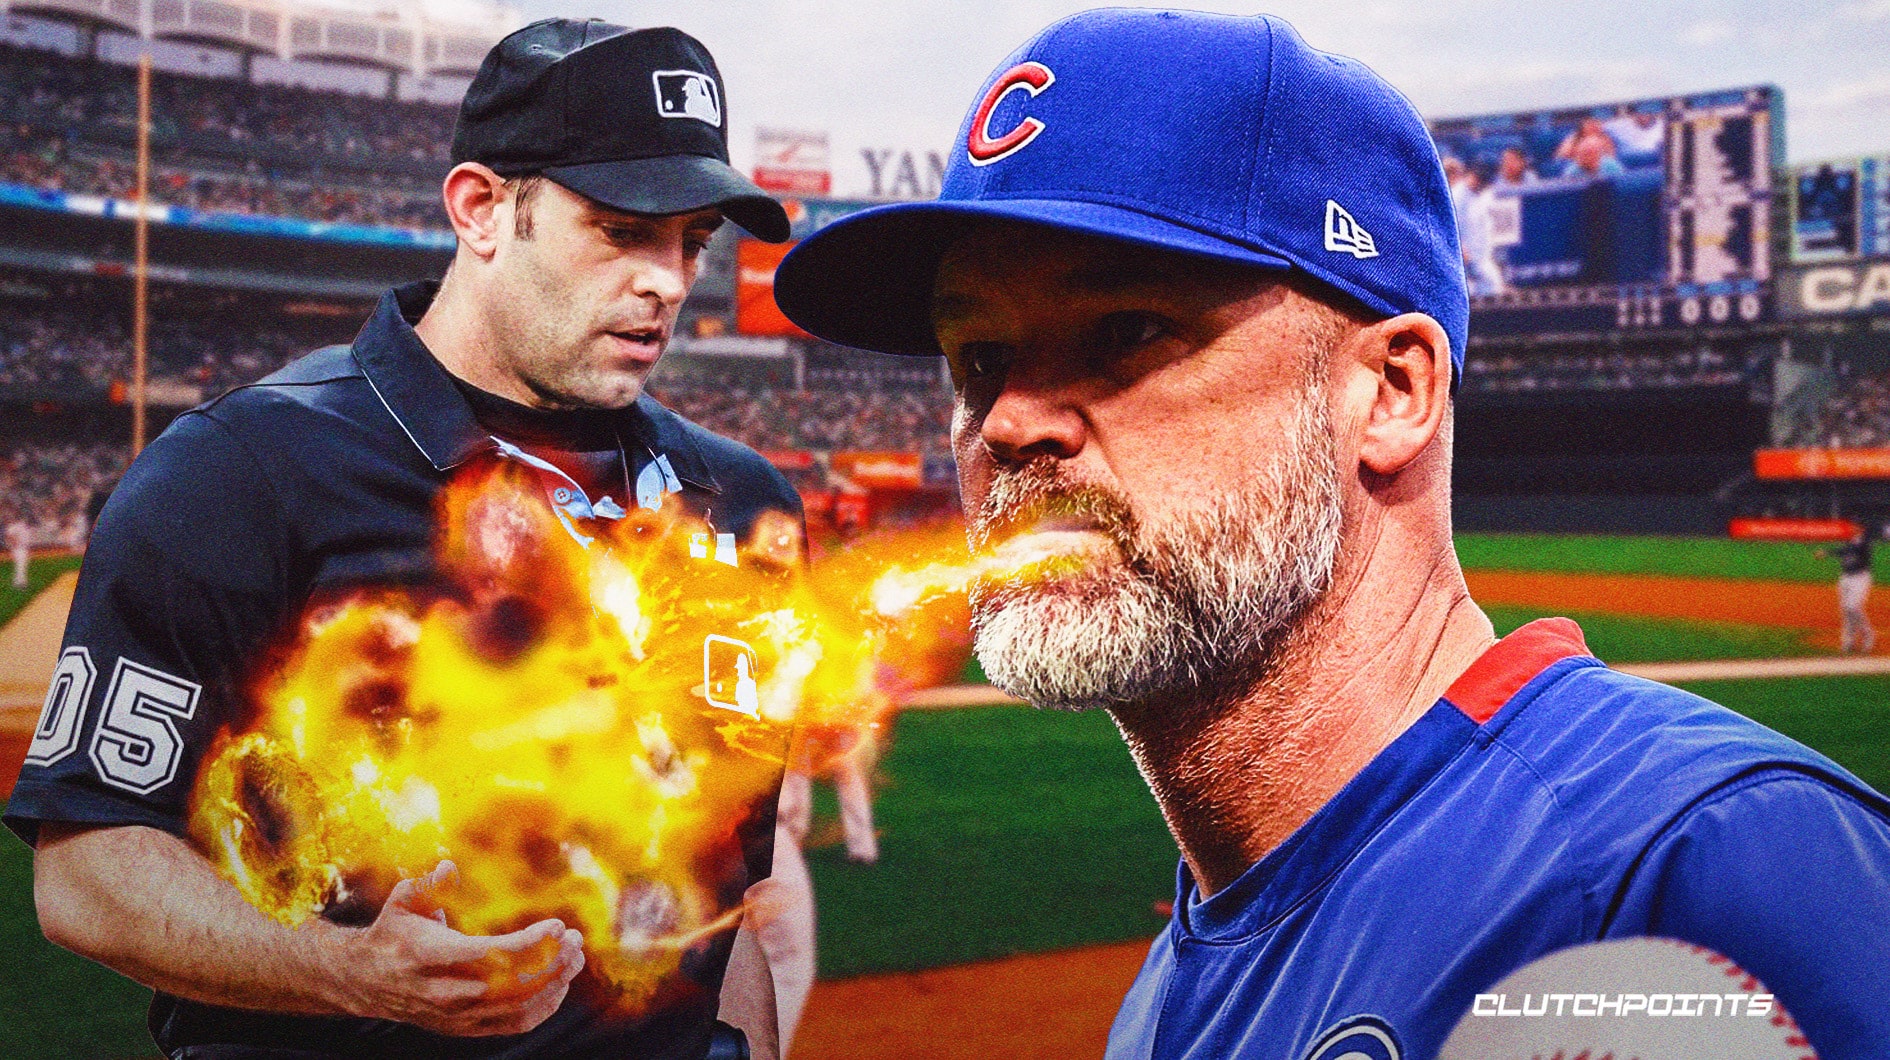 Mics picked up David Ross' insult to ump after first-inning ejection